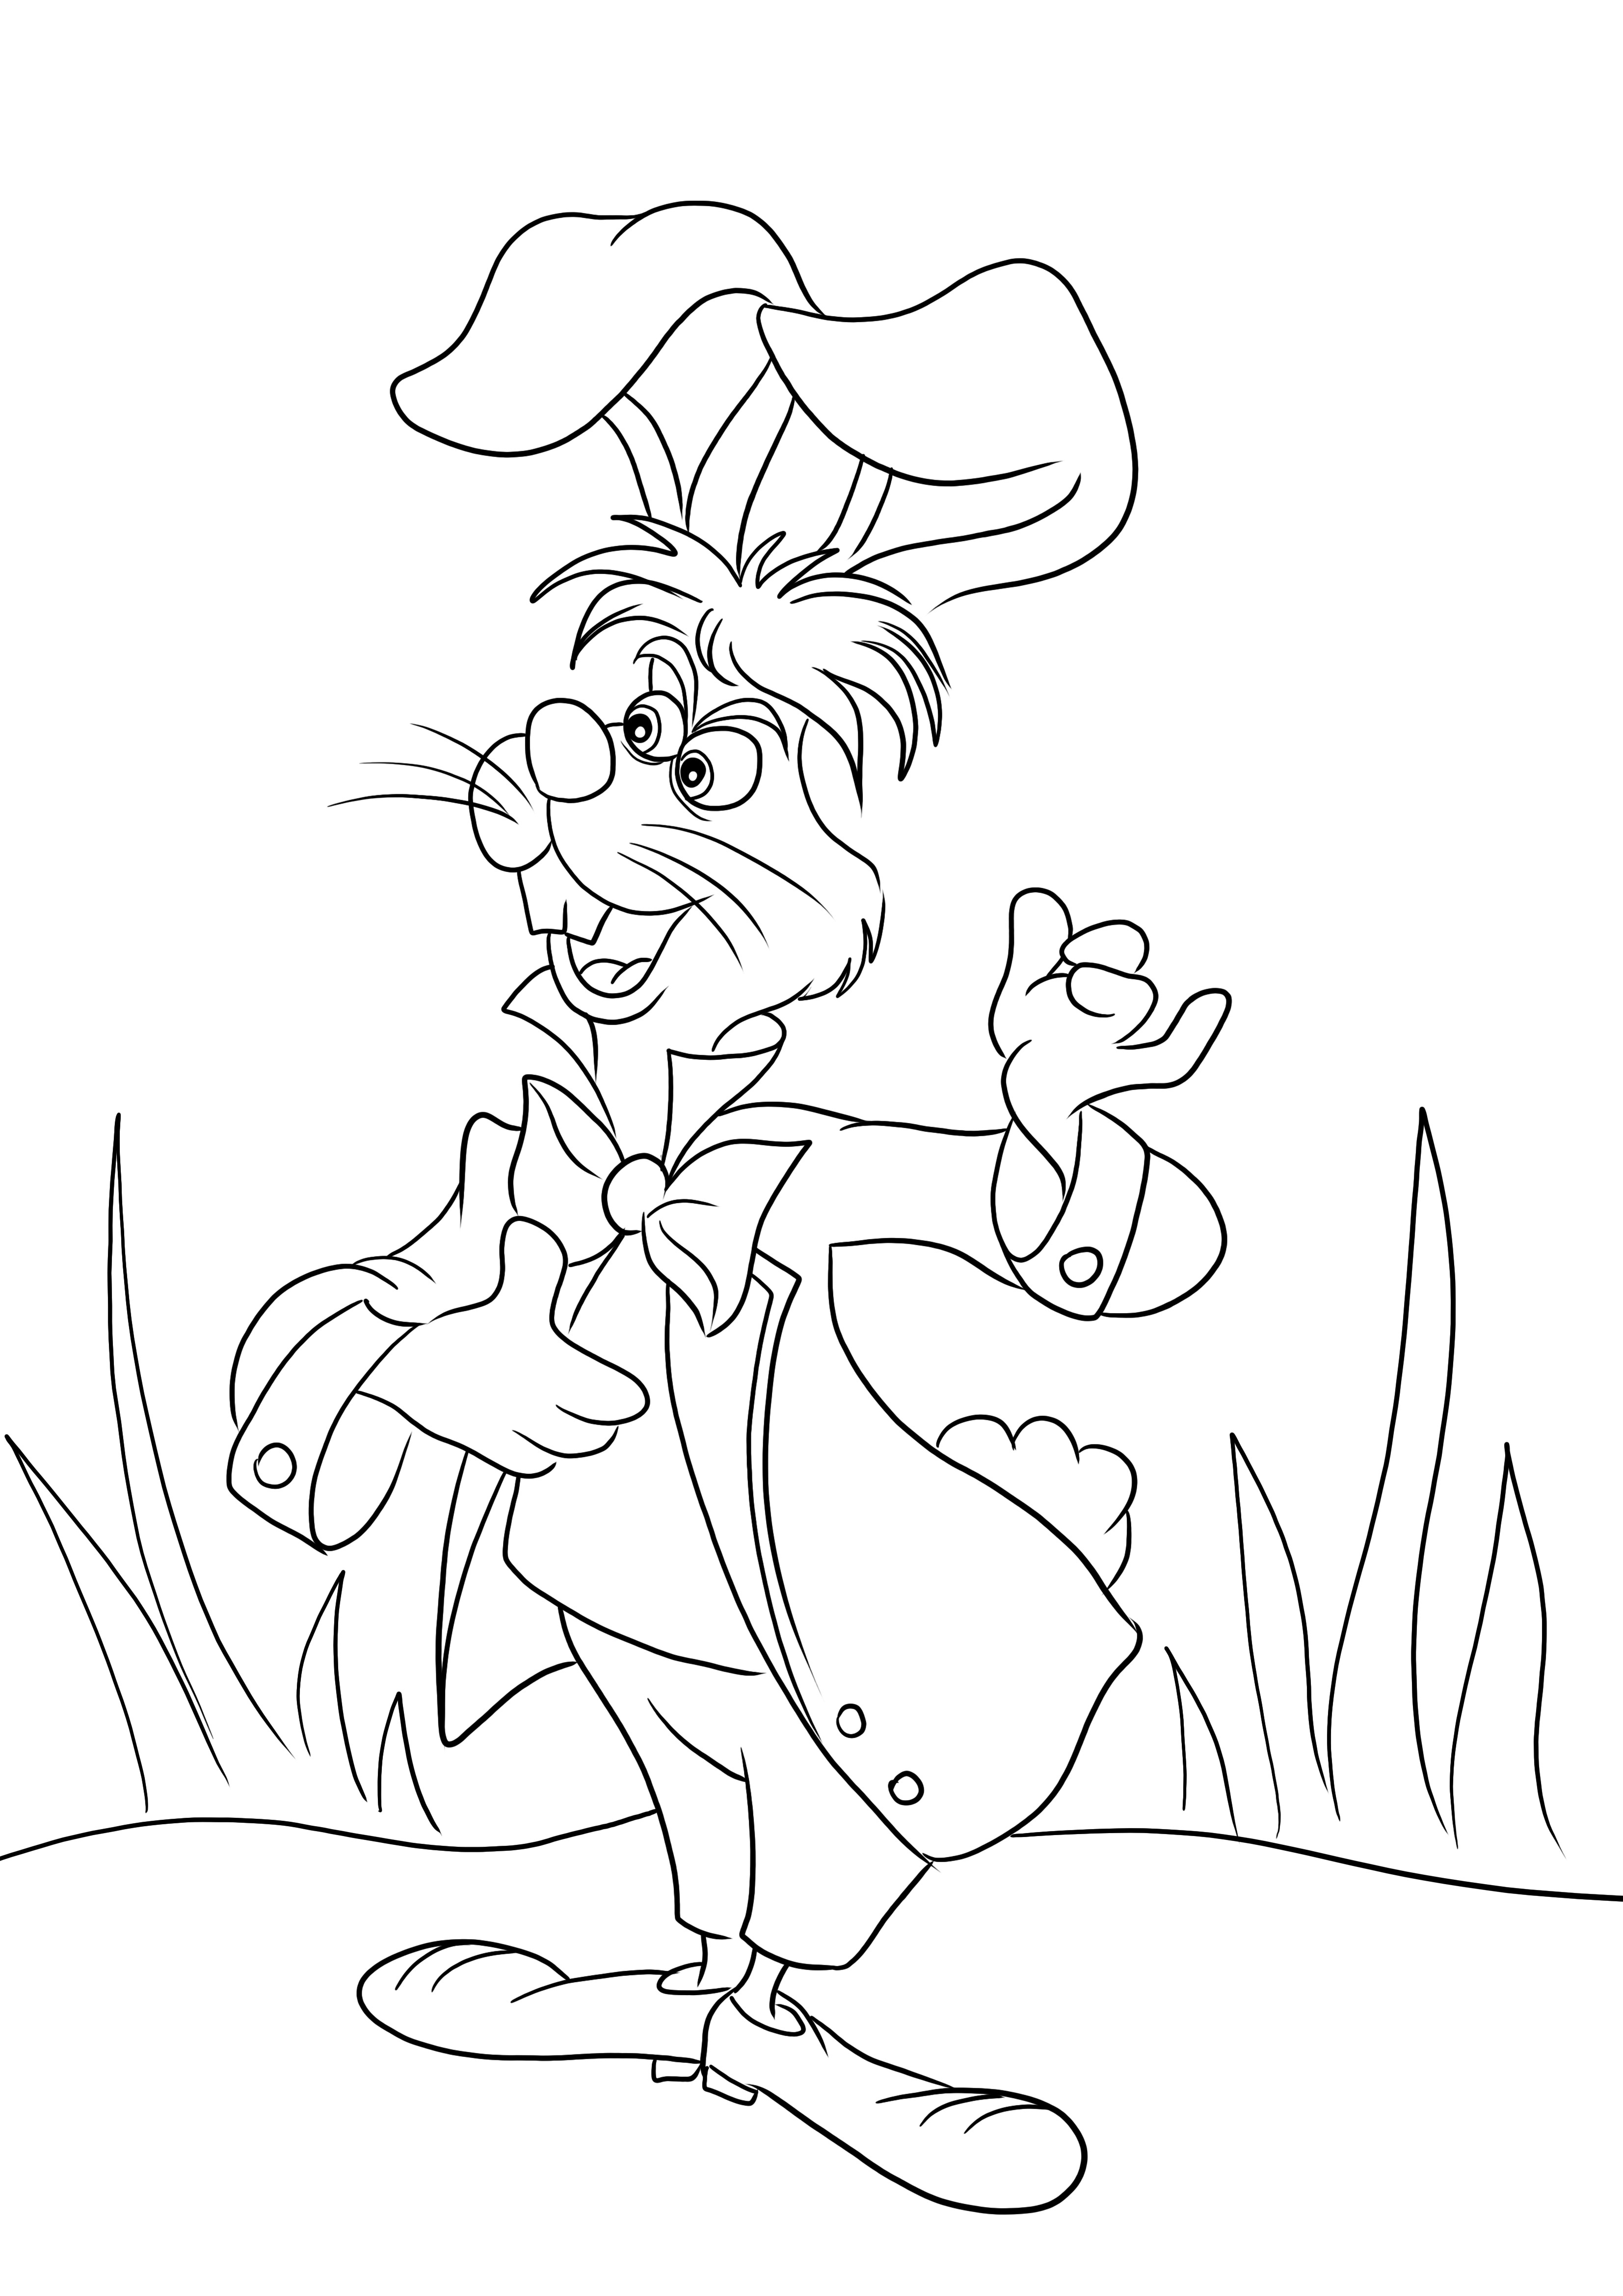 March Hare from Alice in Wonderland to print and easy to color for free